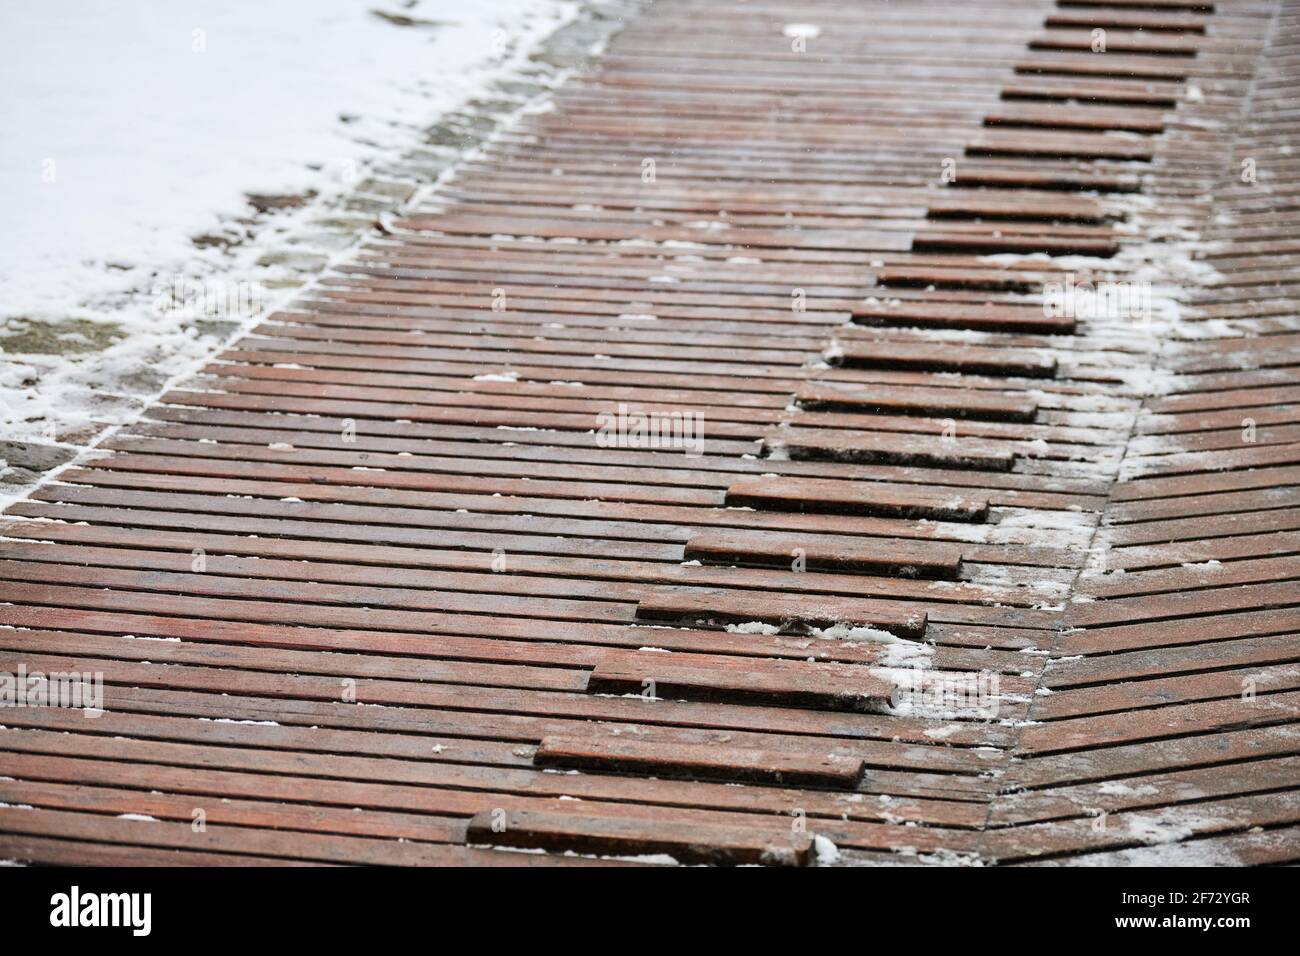 Exterior wooden decking covered with snow. Wooden ramp on playground with non-slip crossbeams, used to ascend up inclined plane. Stock Photo